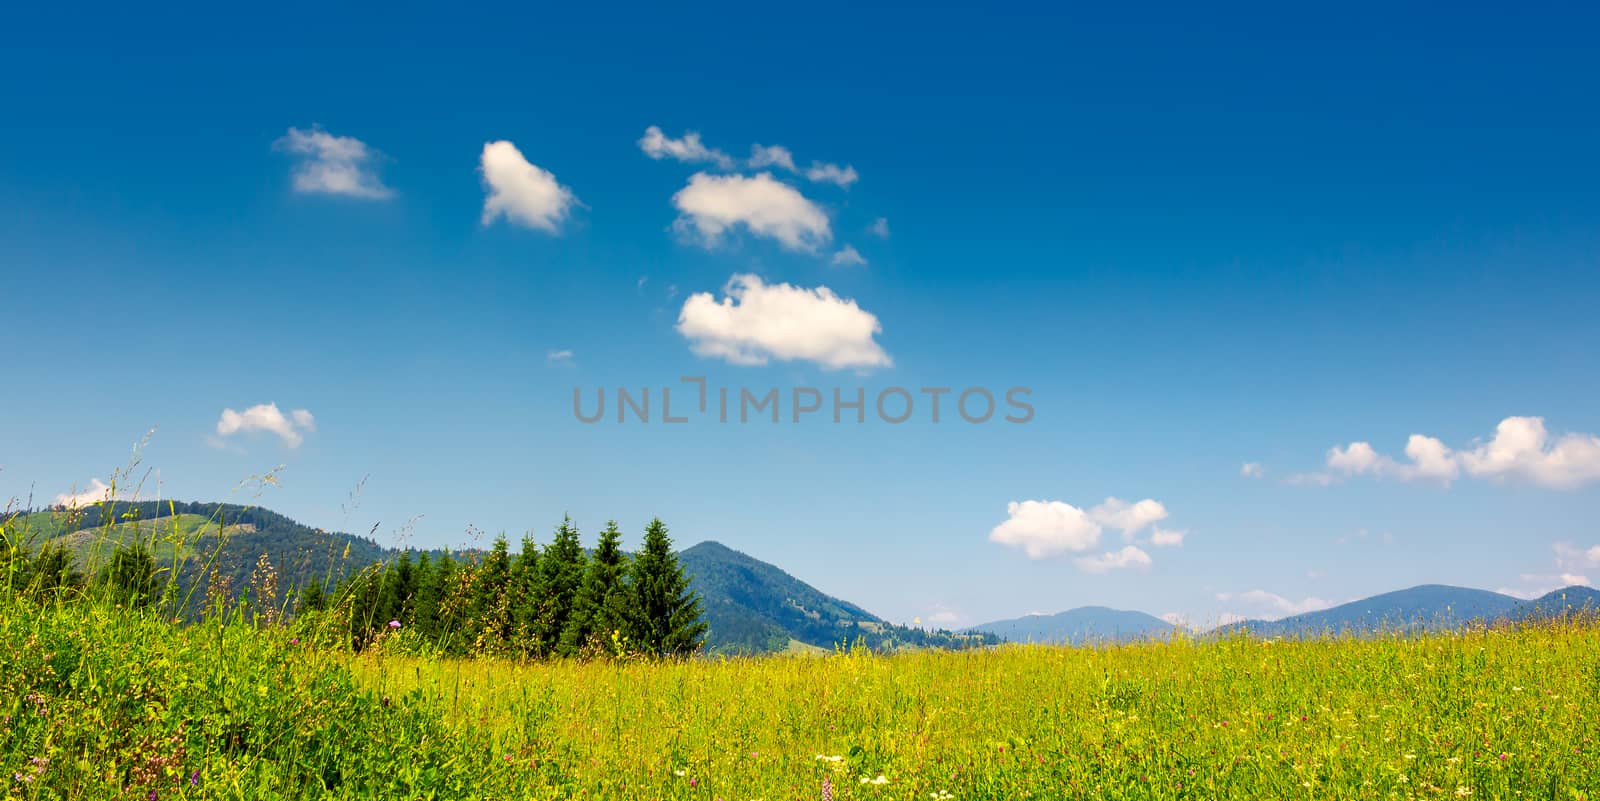 pine trees near valley in mountains  on hillside under sky with  by Pellinni